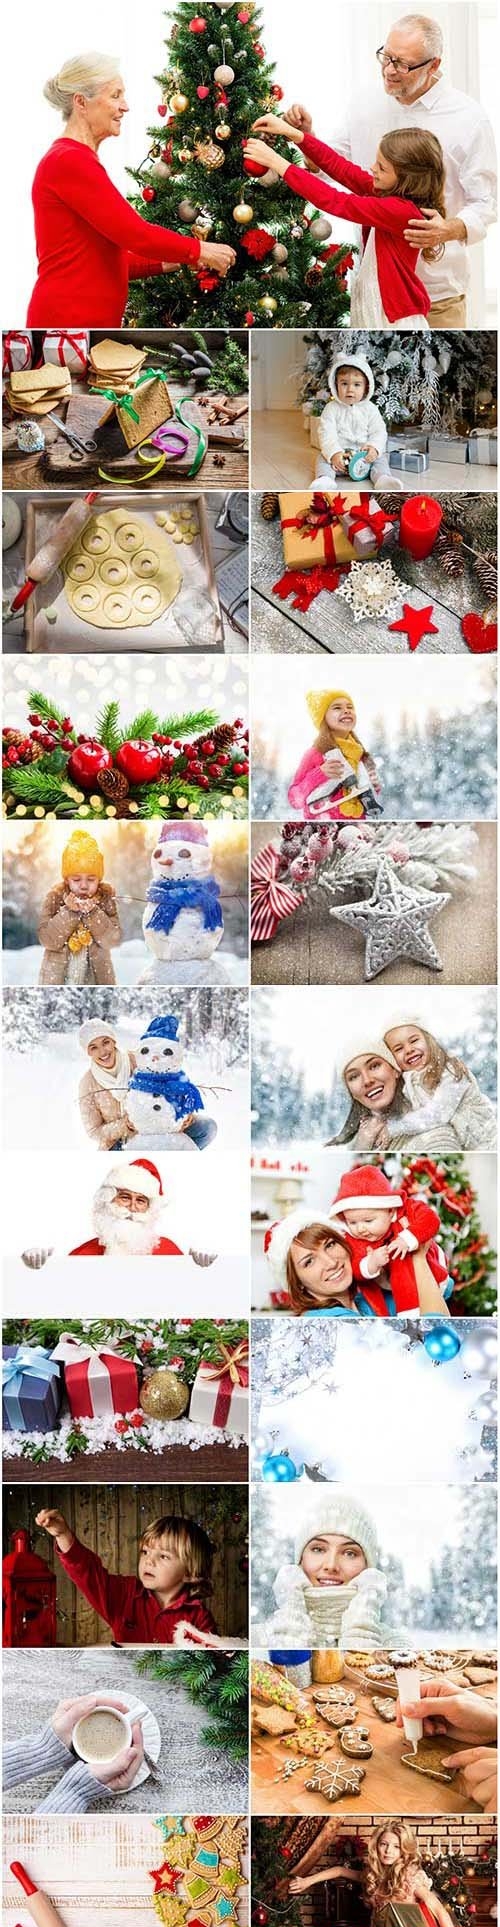 New Year and Christmas stock photos 94